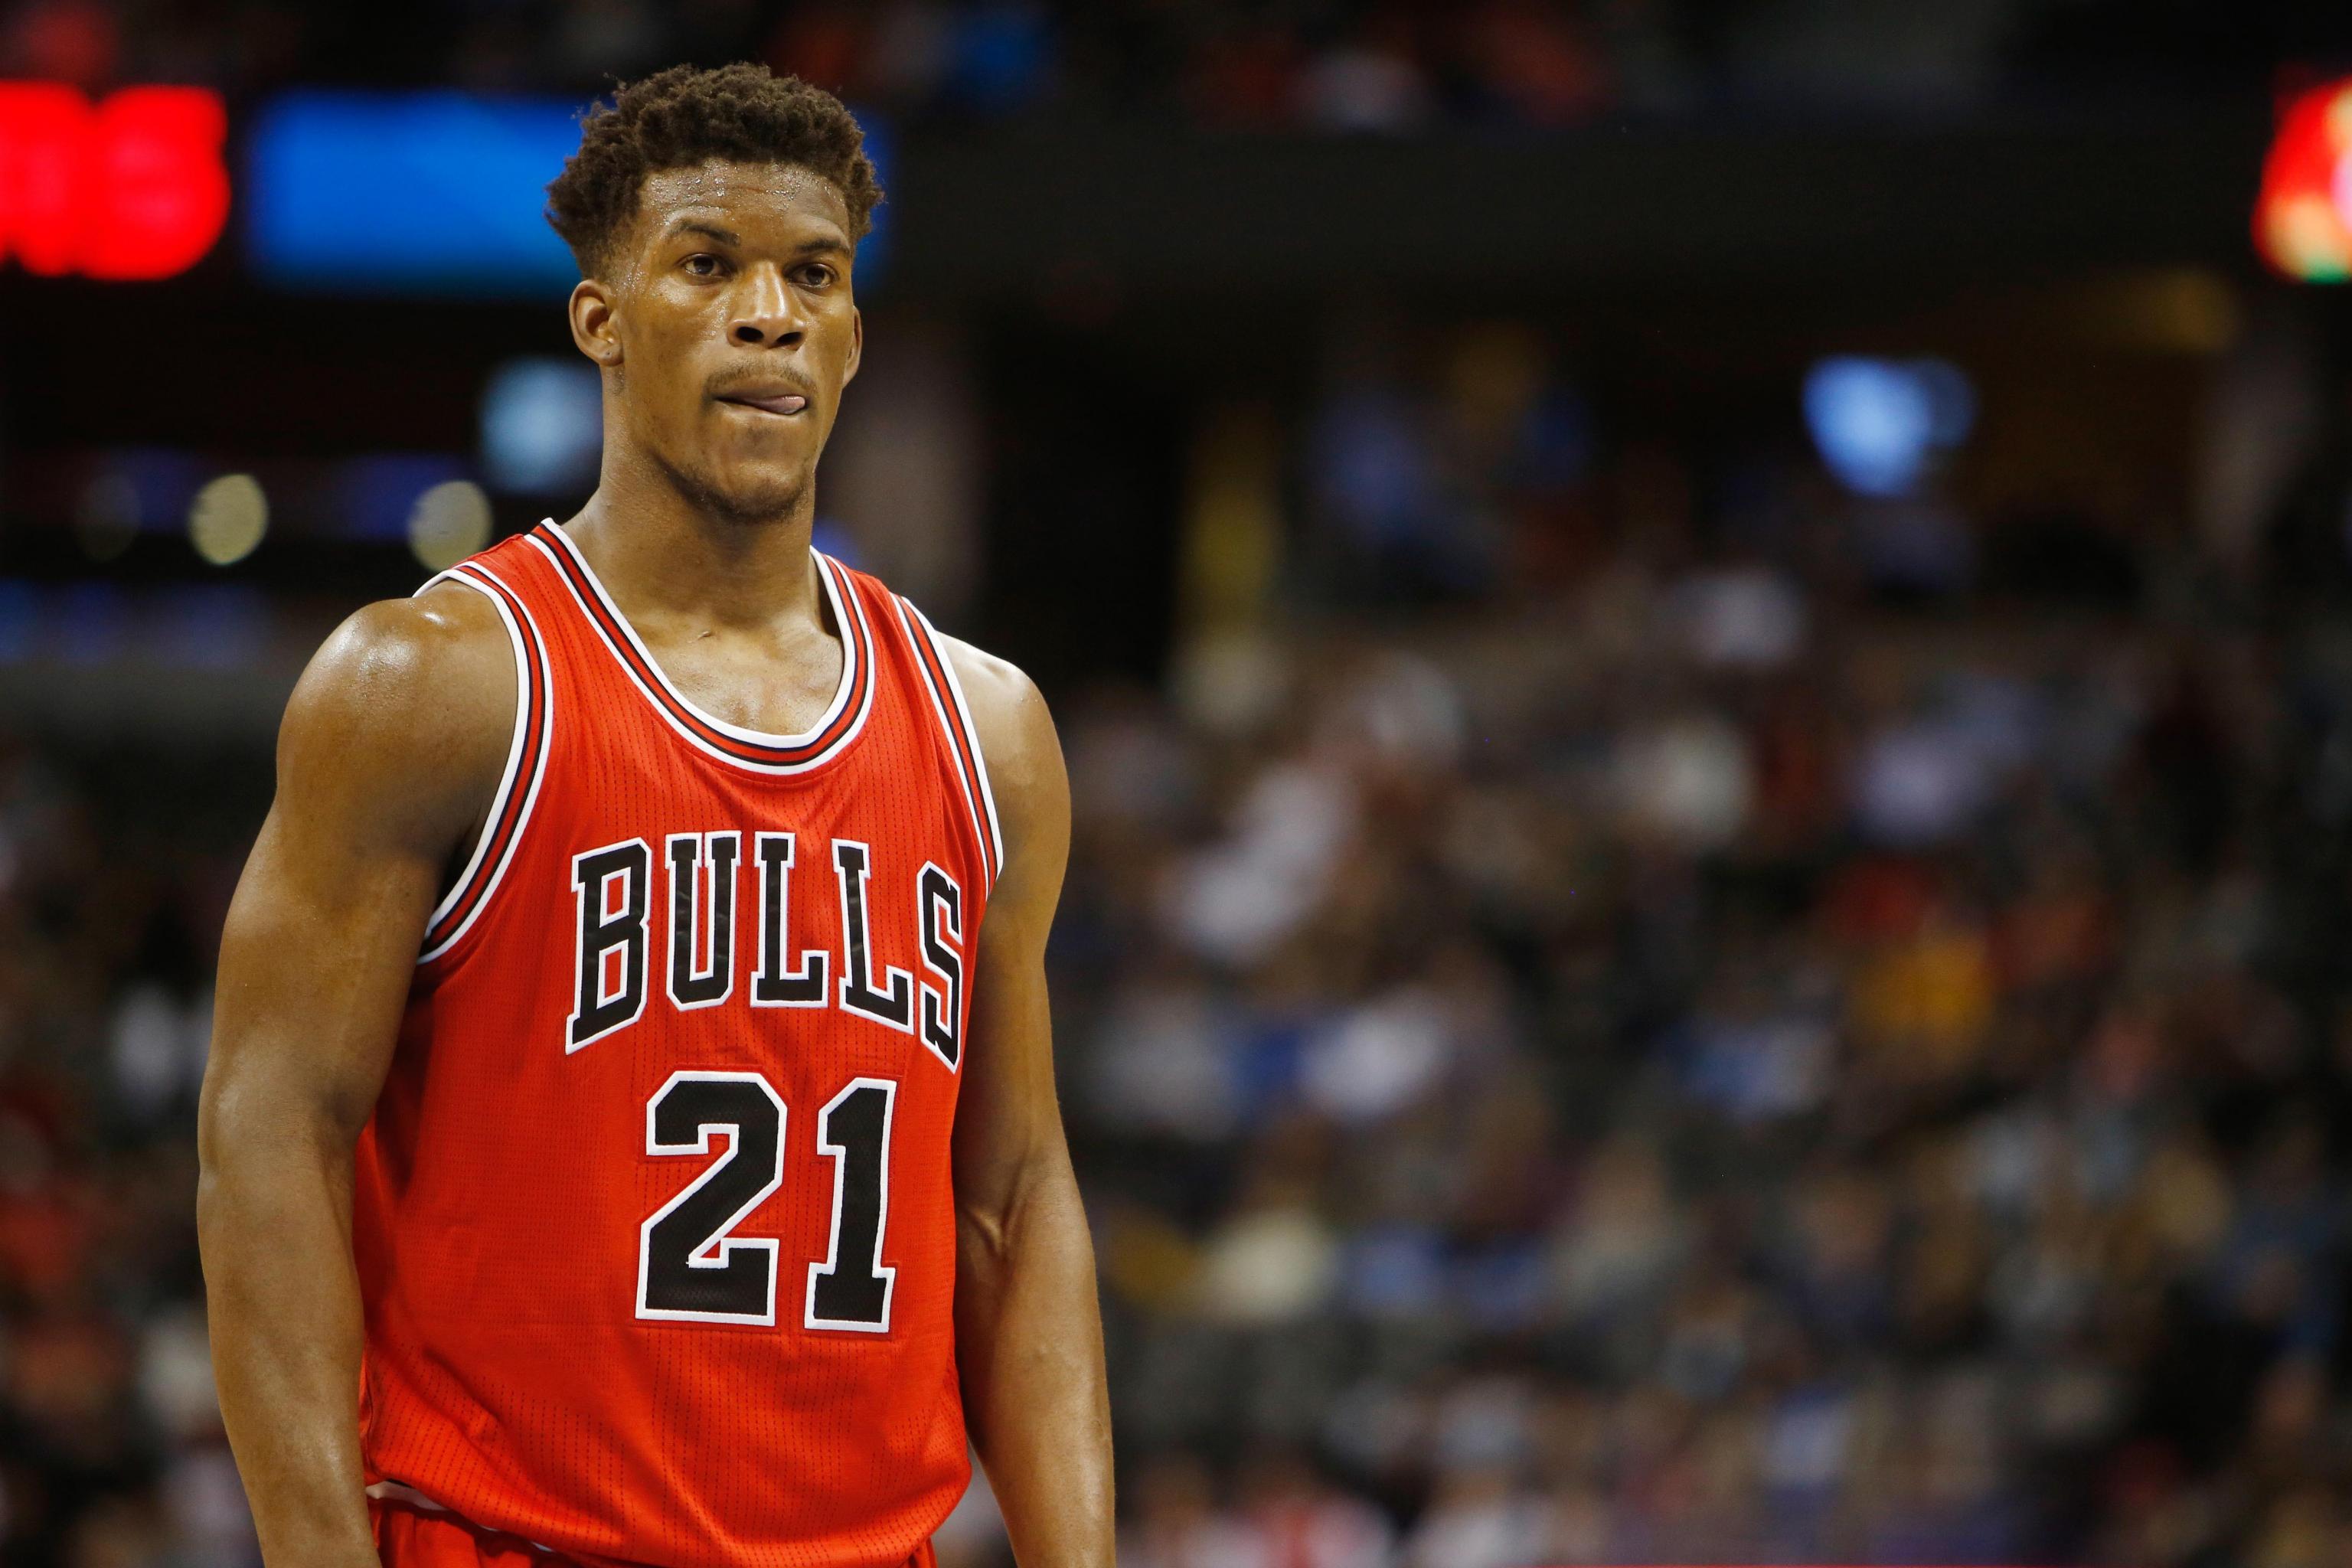 Who is Jimmy Butler?